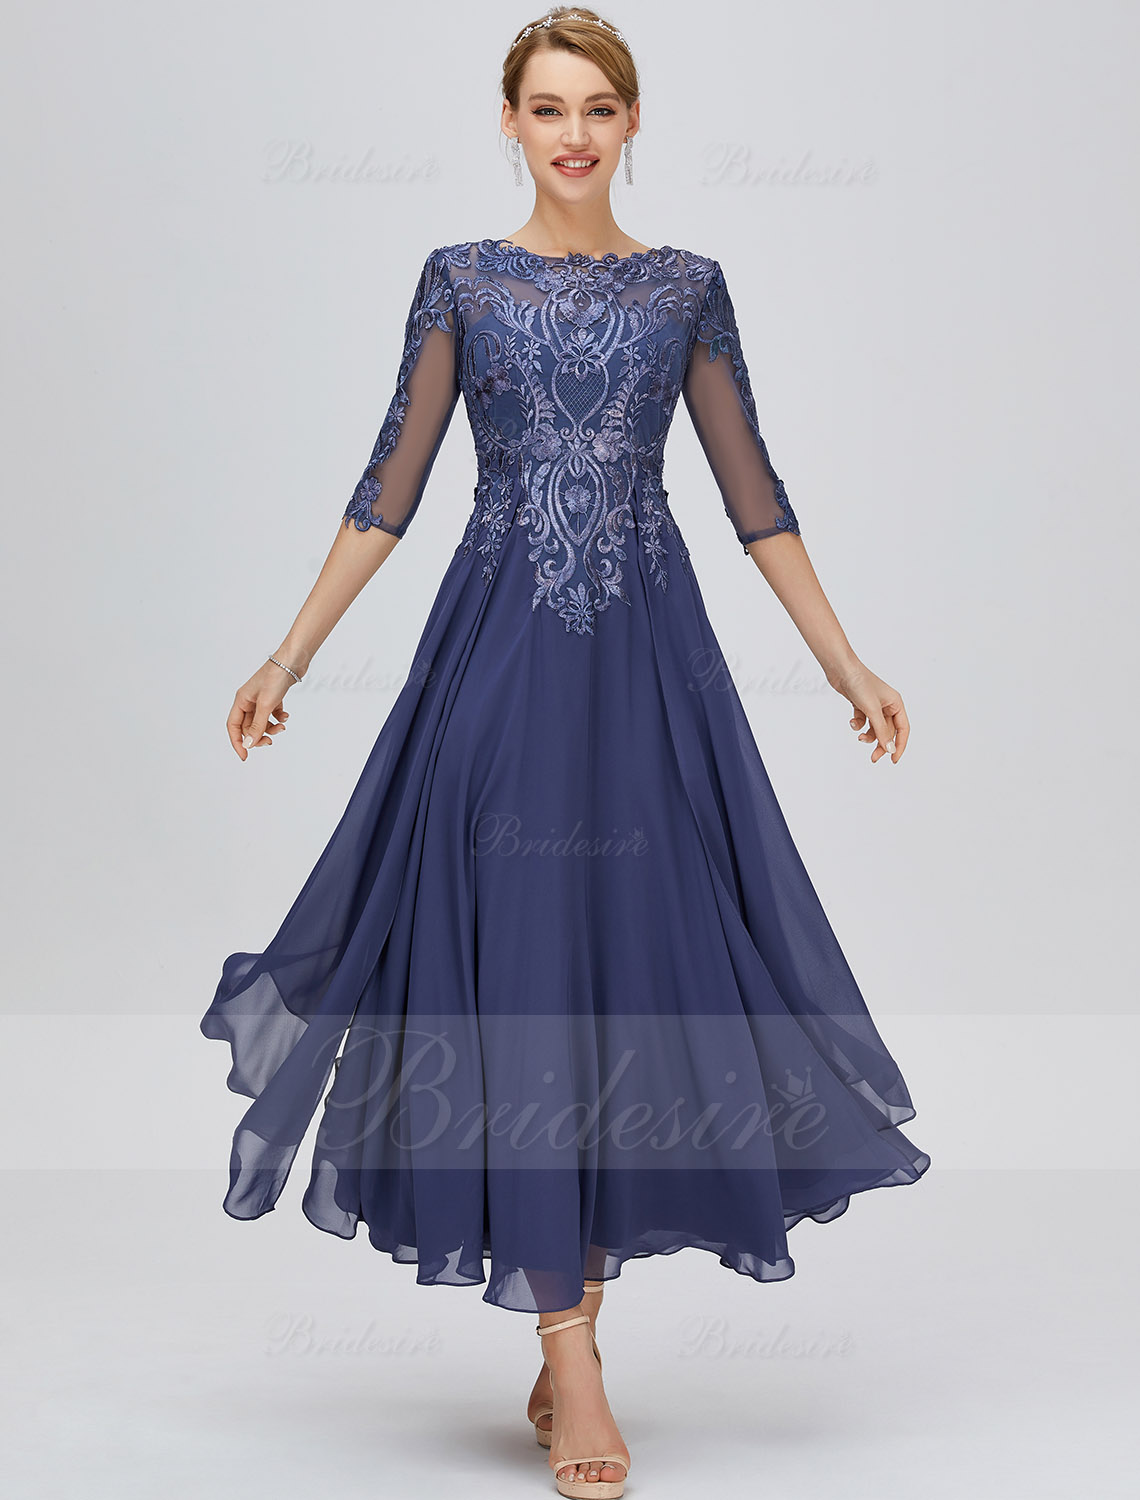 A-line Scoop Ankle-length Chiffon Mother of the Bride Dress with Lace